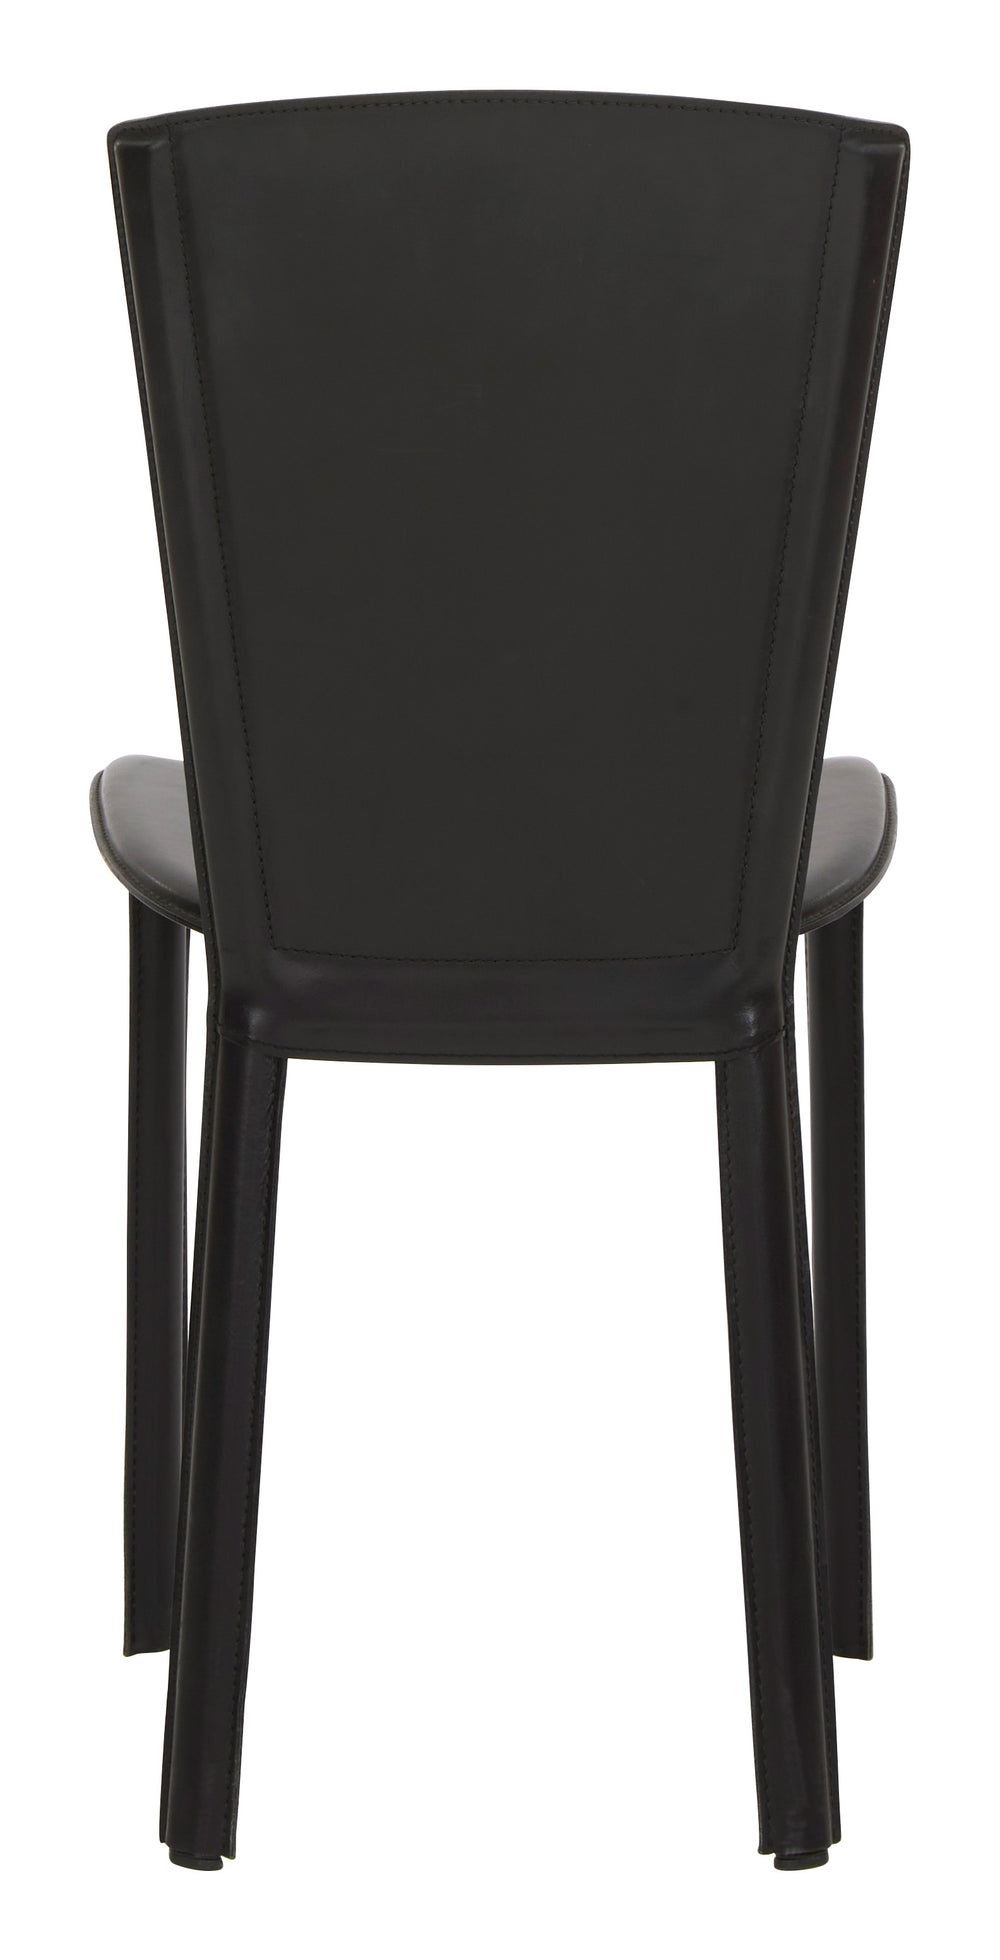 Vintage Black Leather Dining Chair